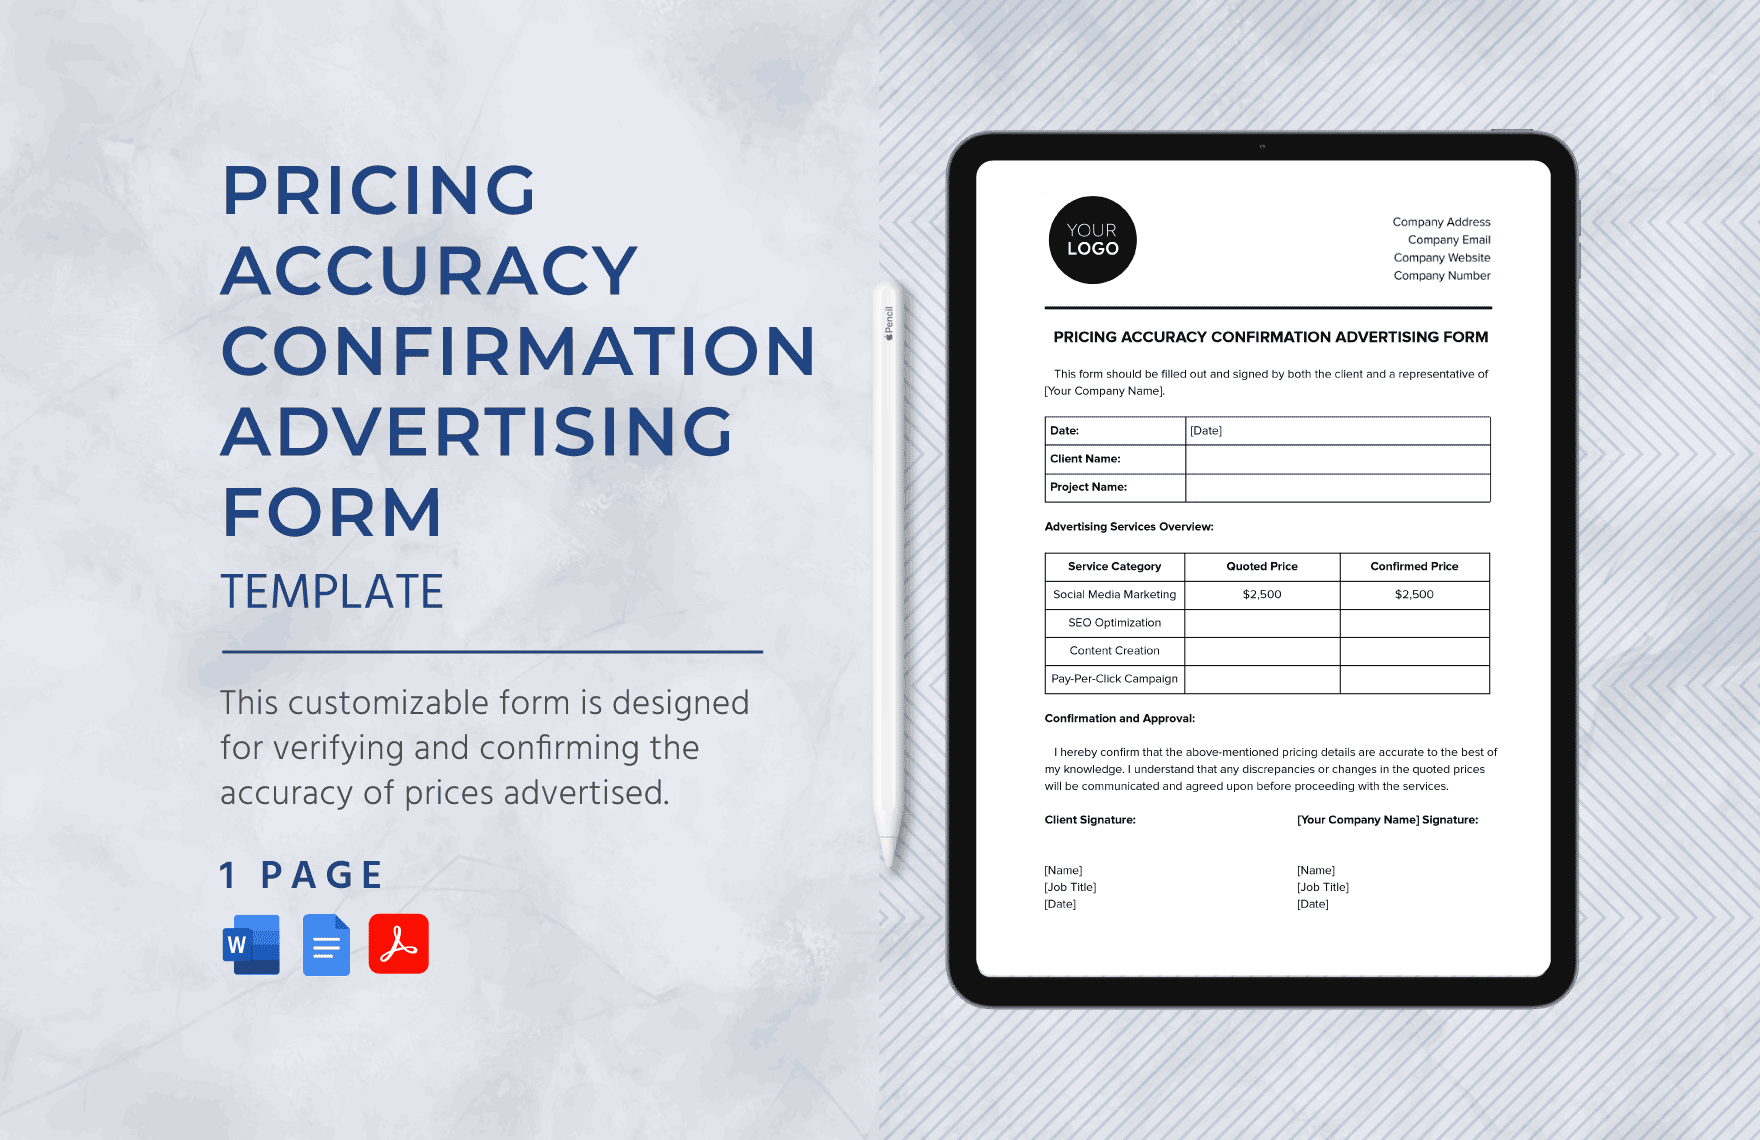 Pricing Accuracy Confirmation Advertising Form Template in Word, Google Docs, PDF